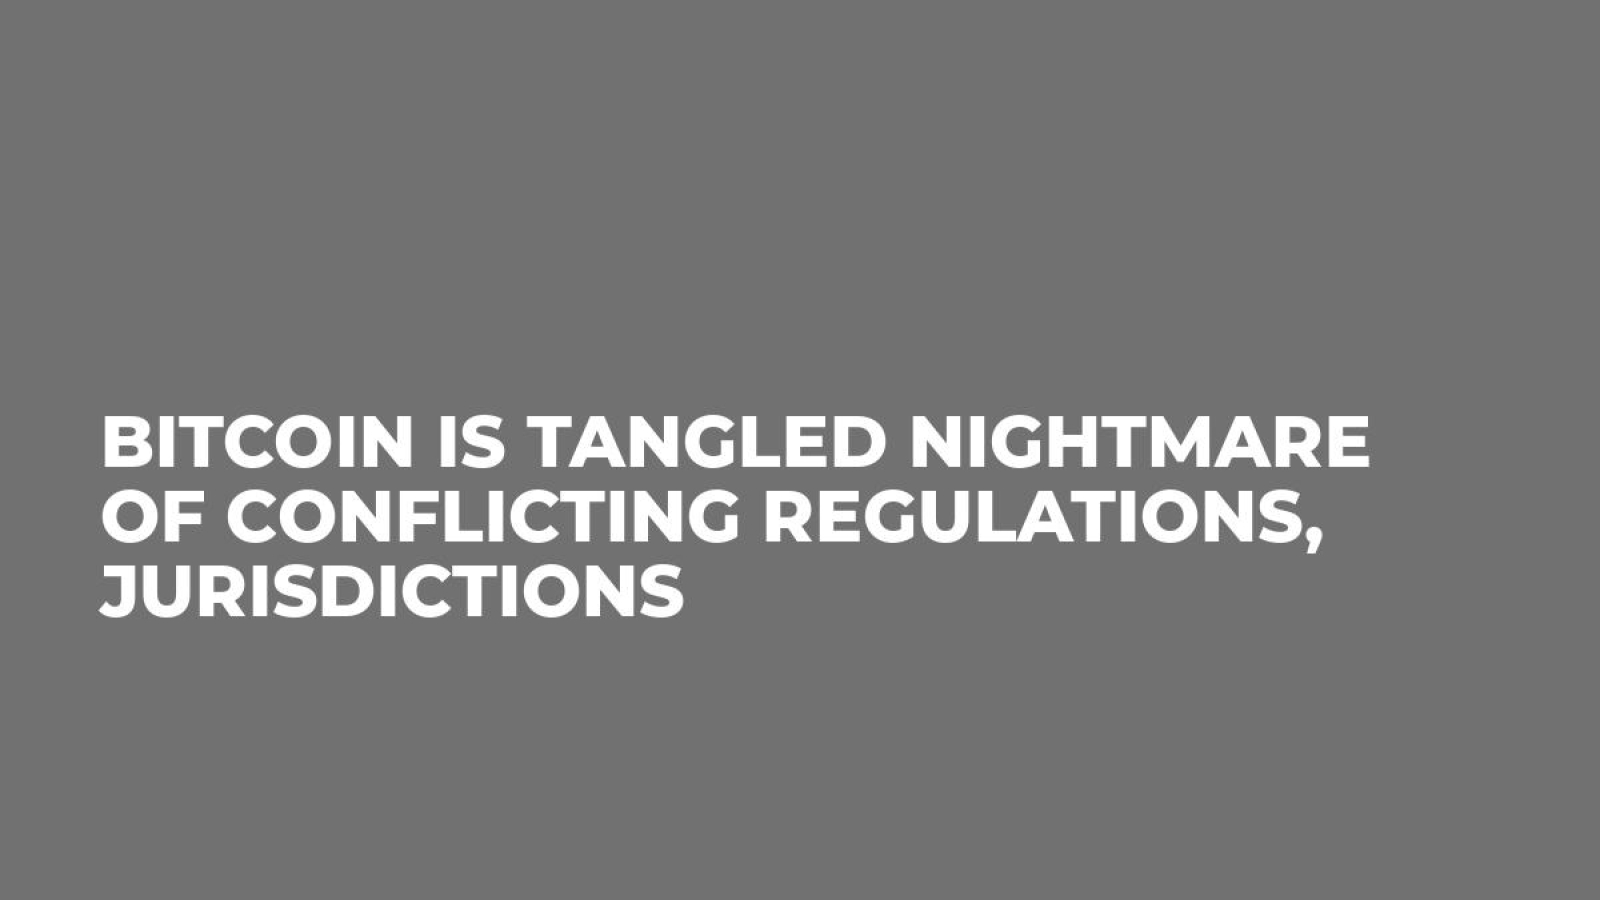 Bitcoin is Tangled Nightmare of Conflicting Regulations, Jurisdictions